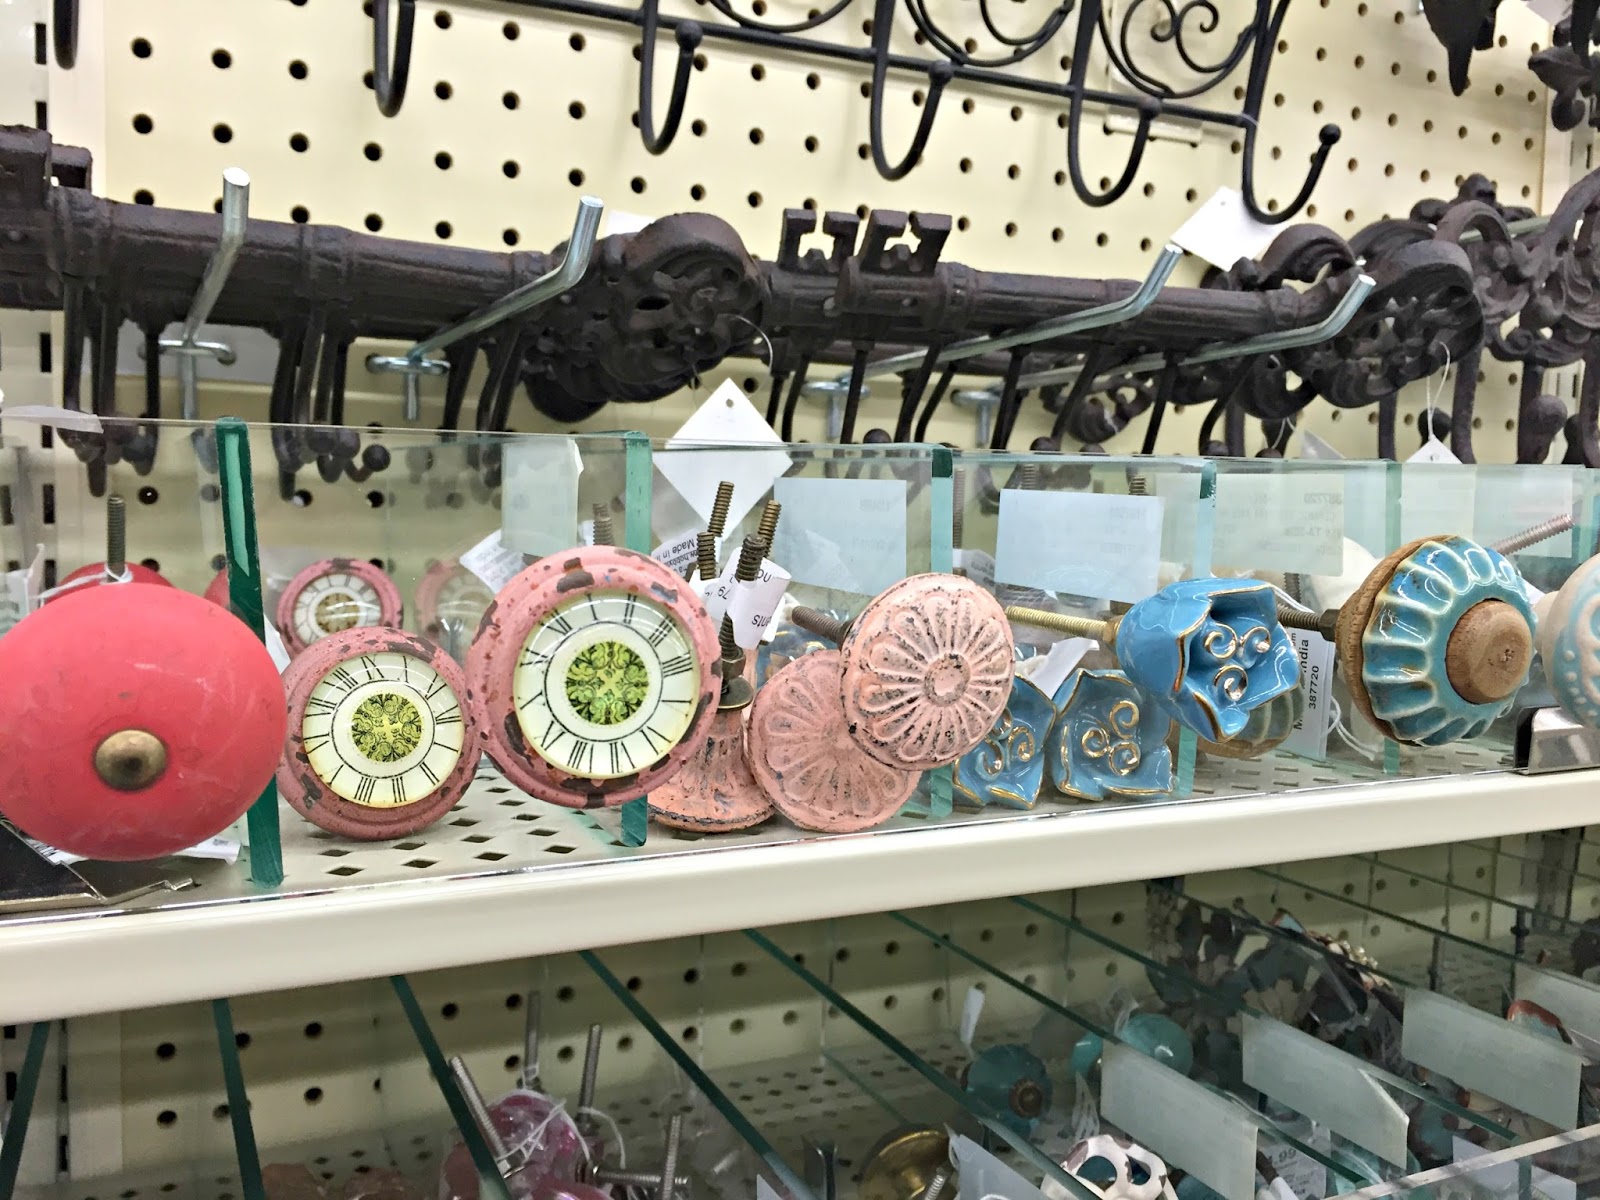 The Best Place To Find Beautiful Knobs And Pulls From Thrifty